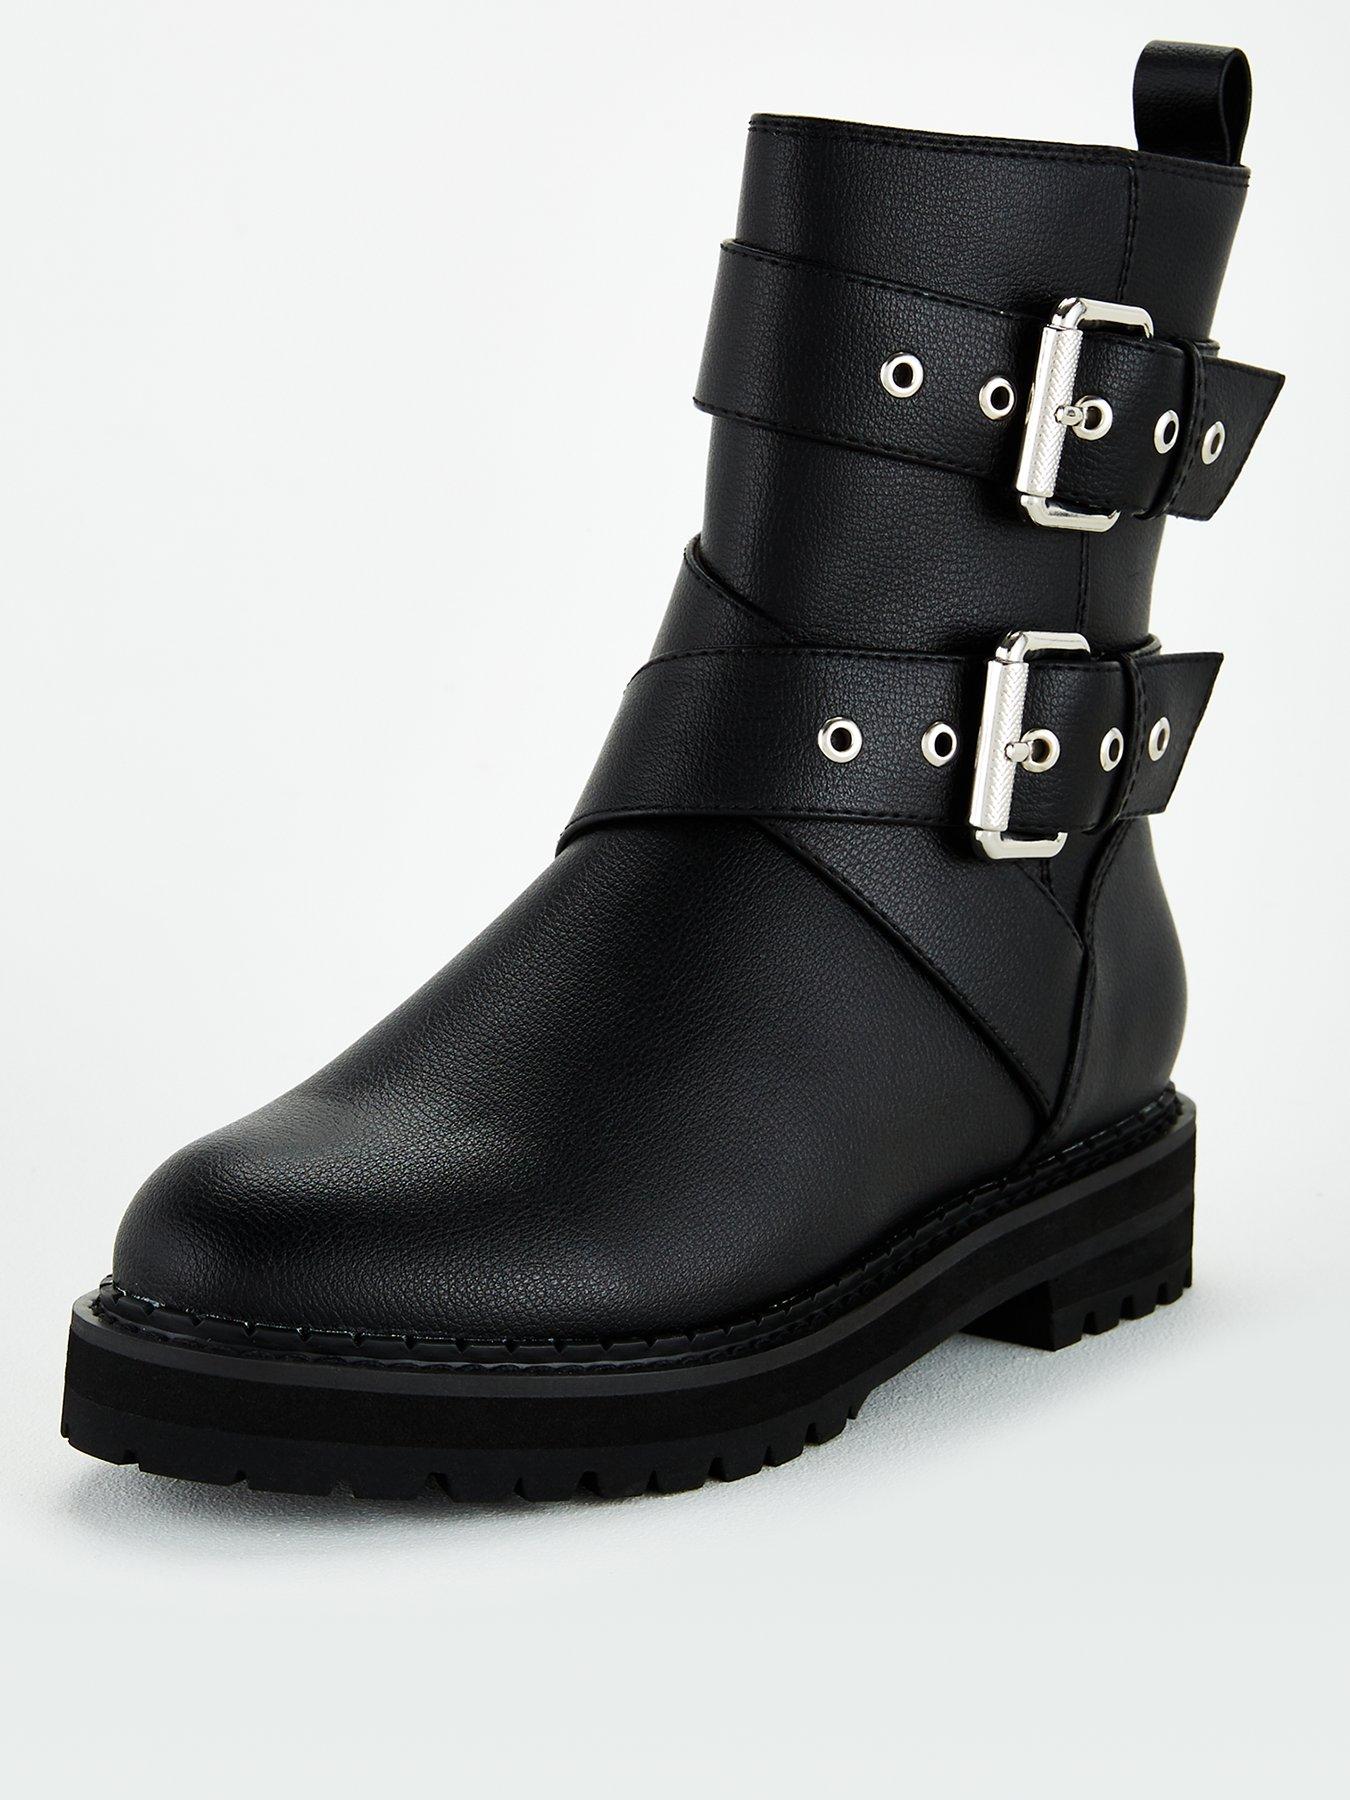 Ankle Boots | Women's Shoes \u0026 Boots 